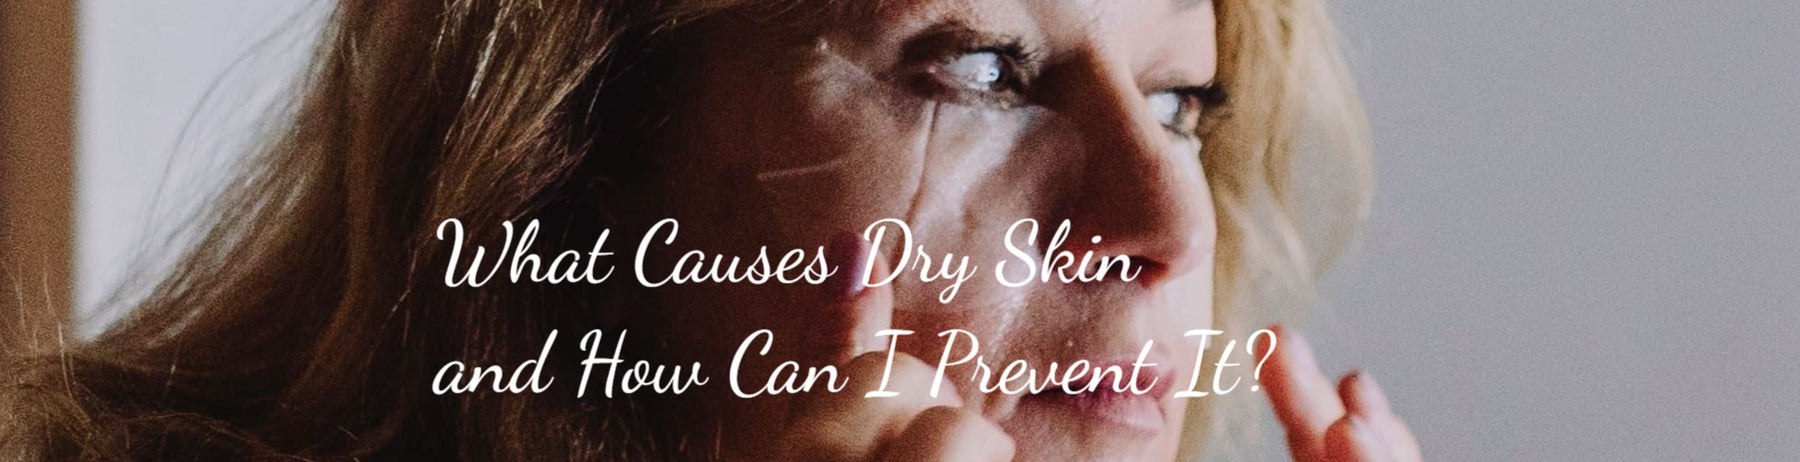 What Causes Dry Skin and How Can I Prevent It?